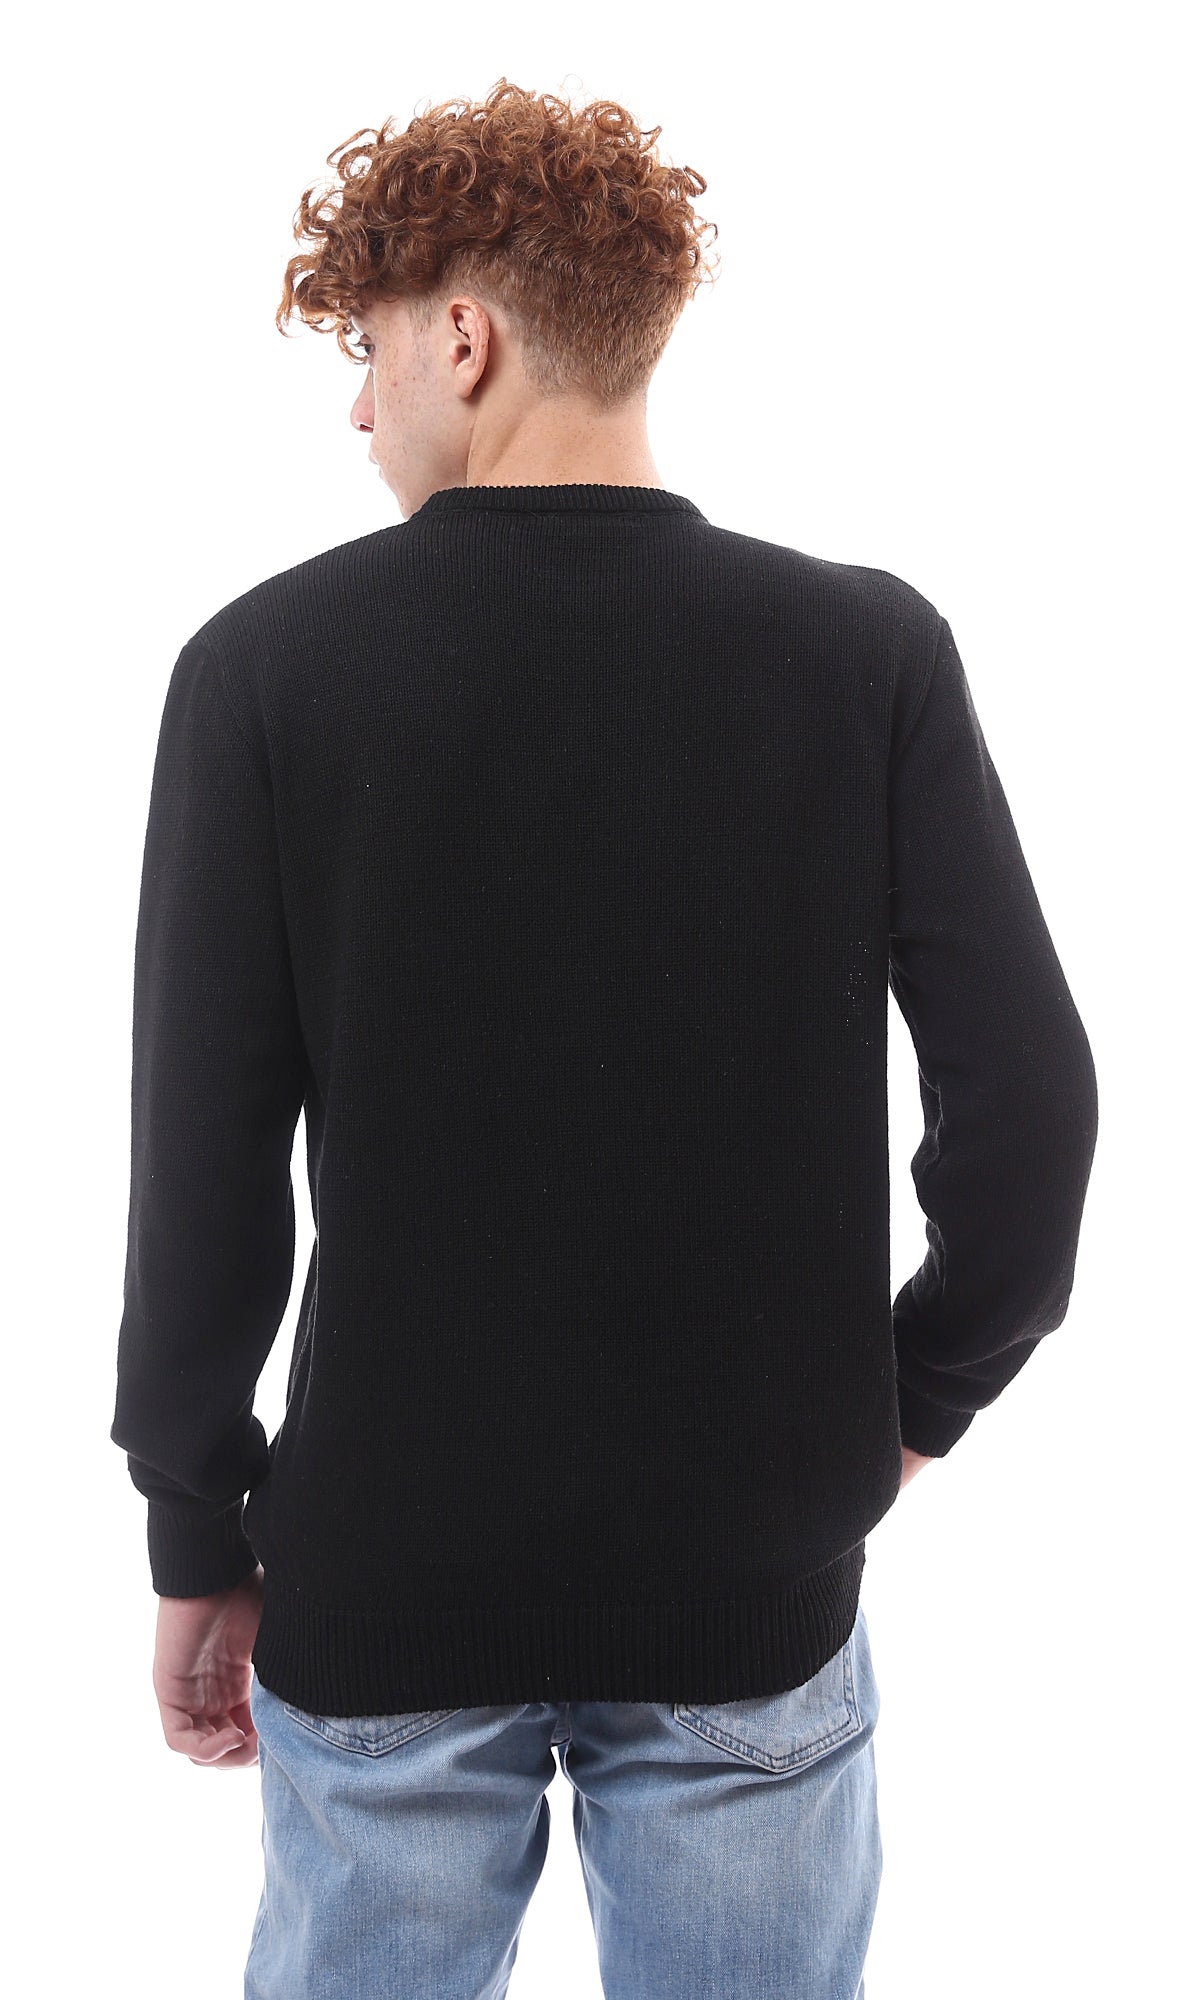 O174206 Black Knitted Pullover With Crew Neck